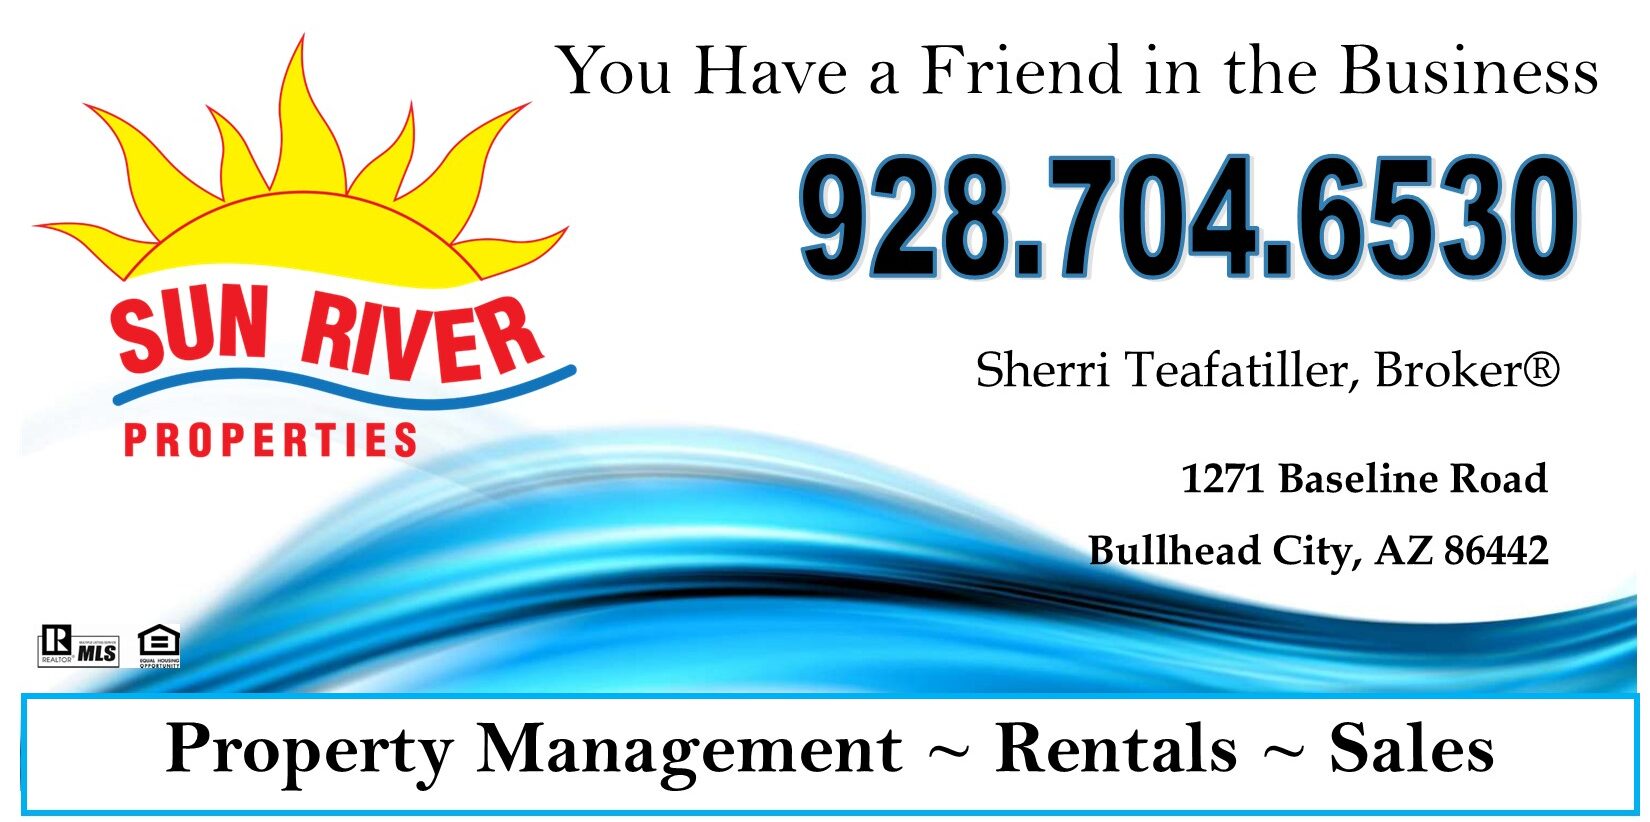 Bullhead City Property Management and Sales